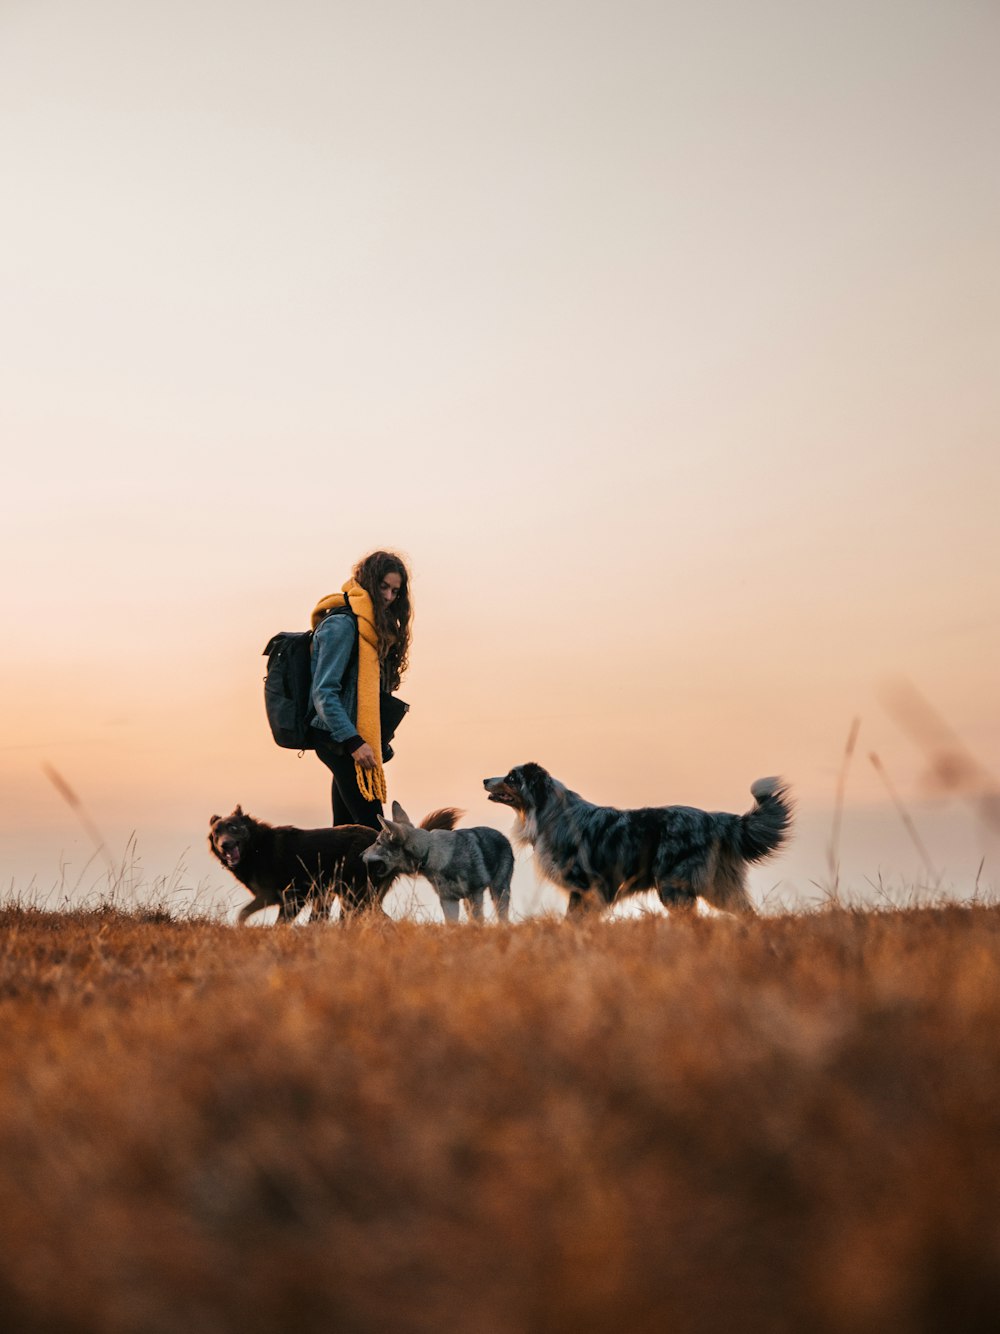 a person walking with dogs